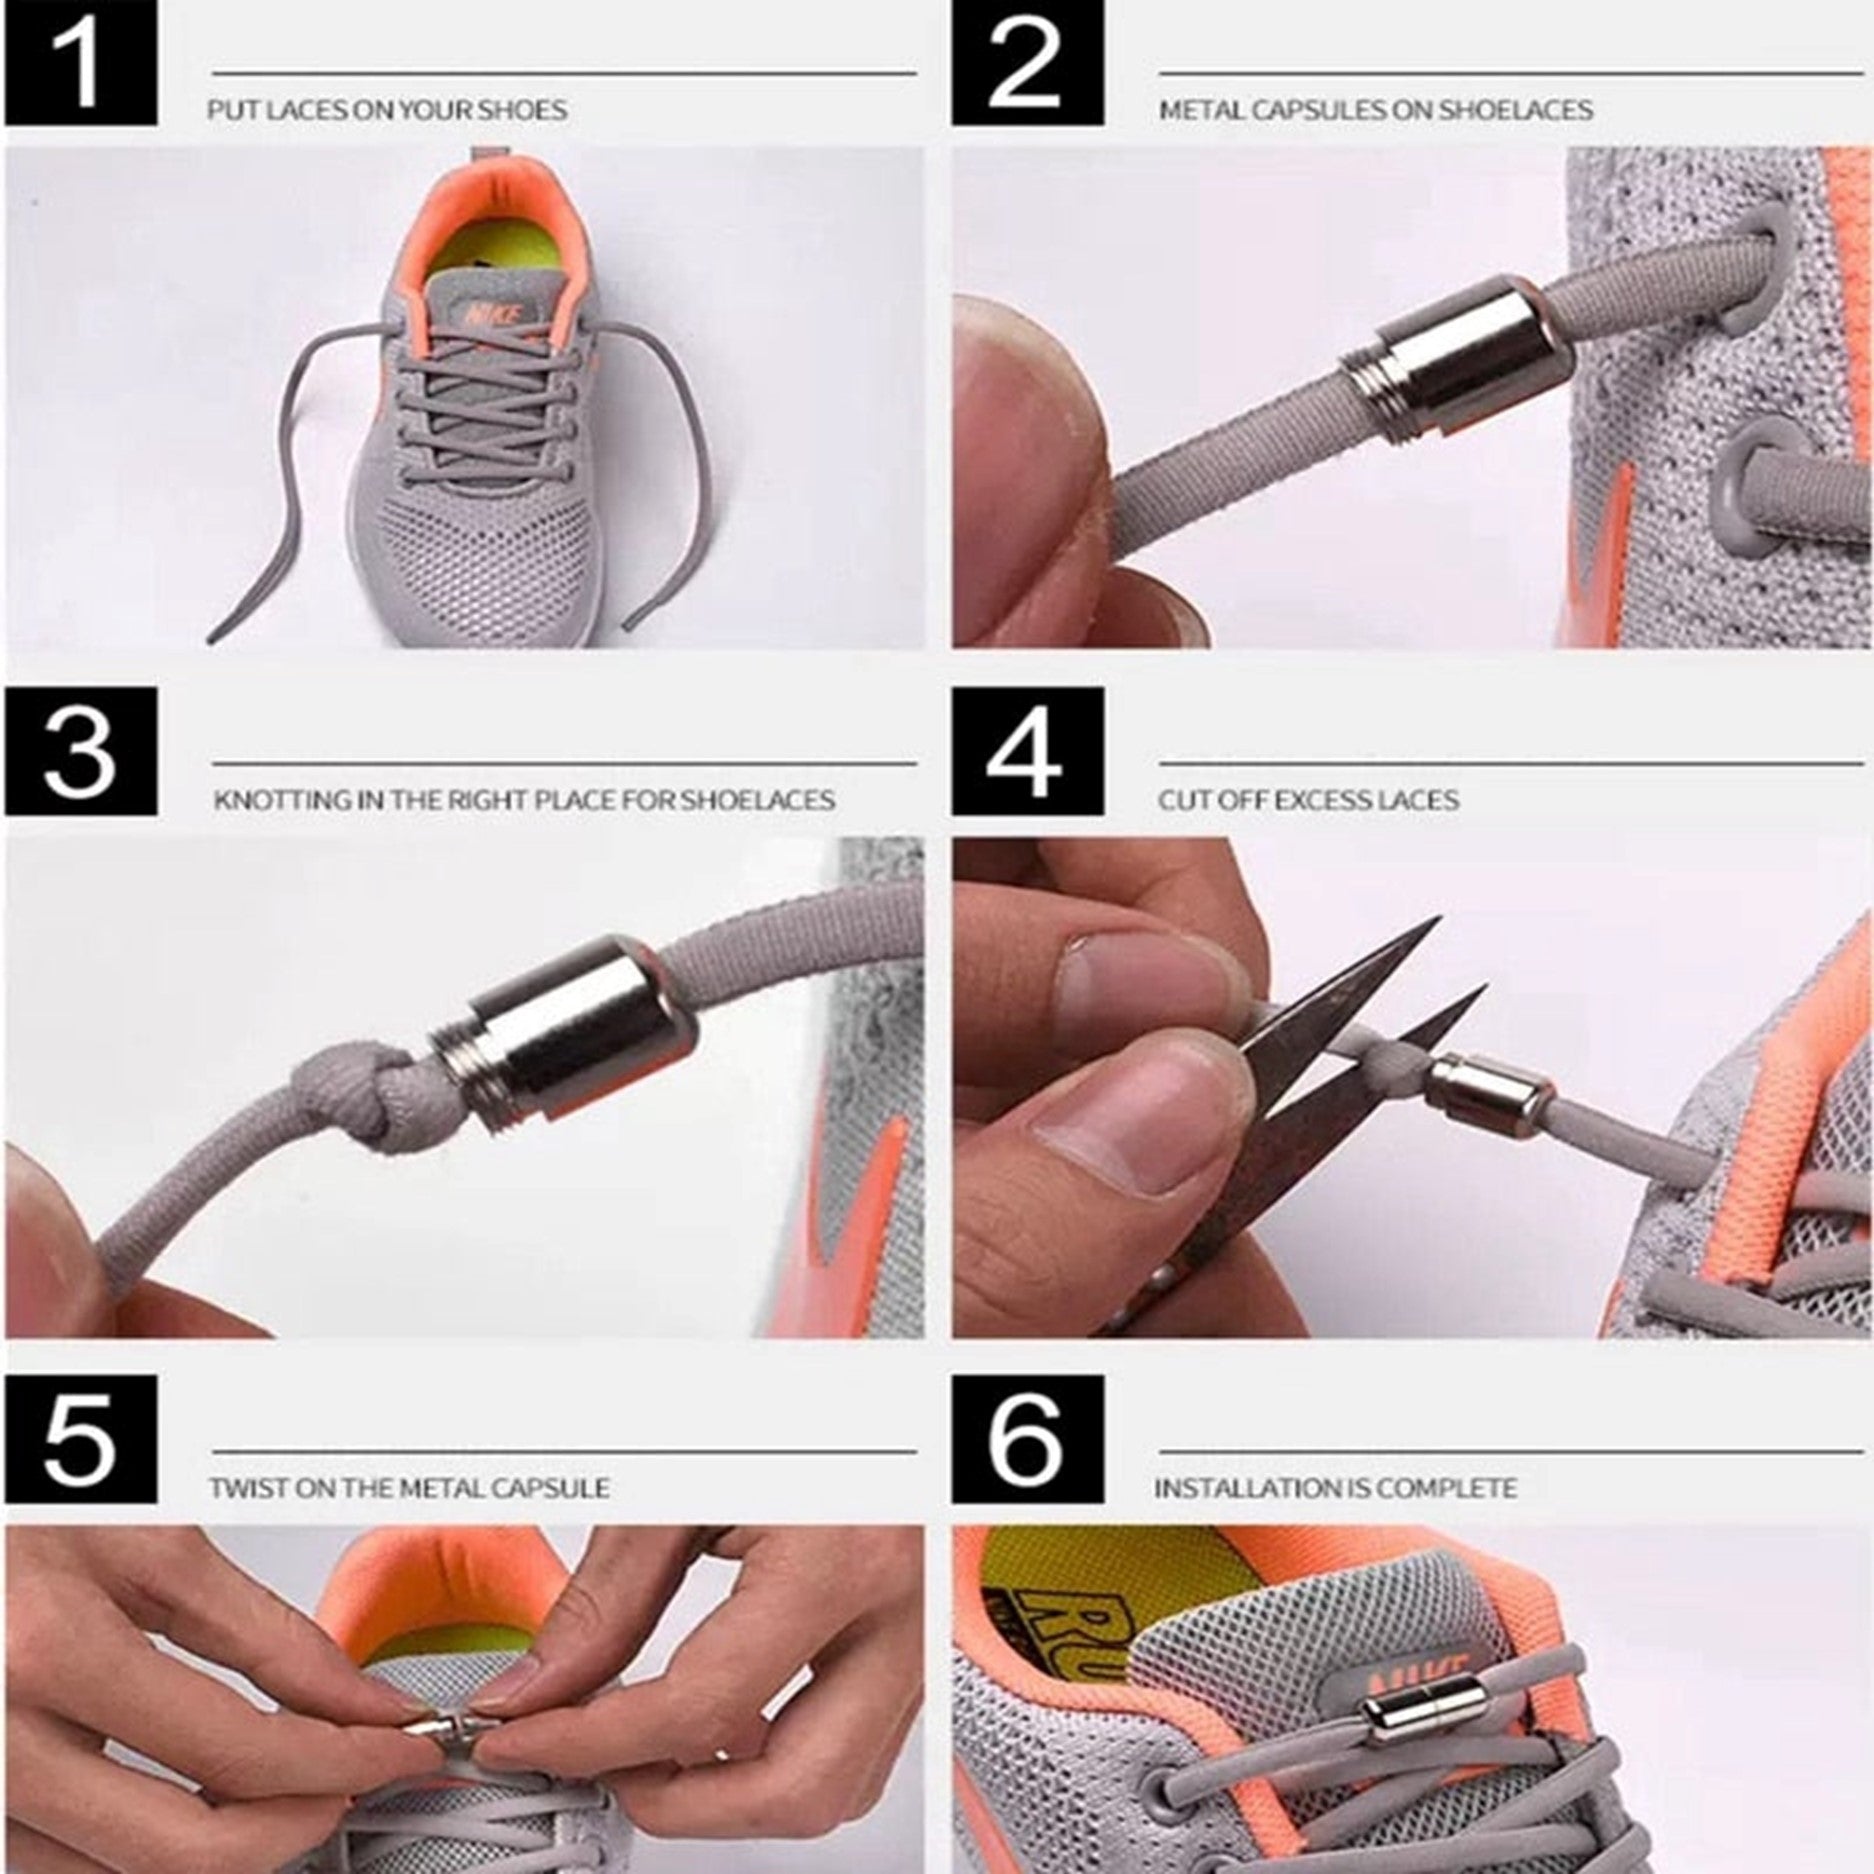 Lock Laces Instructions - How to Install your Lock Laces 